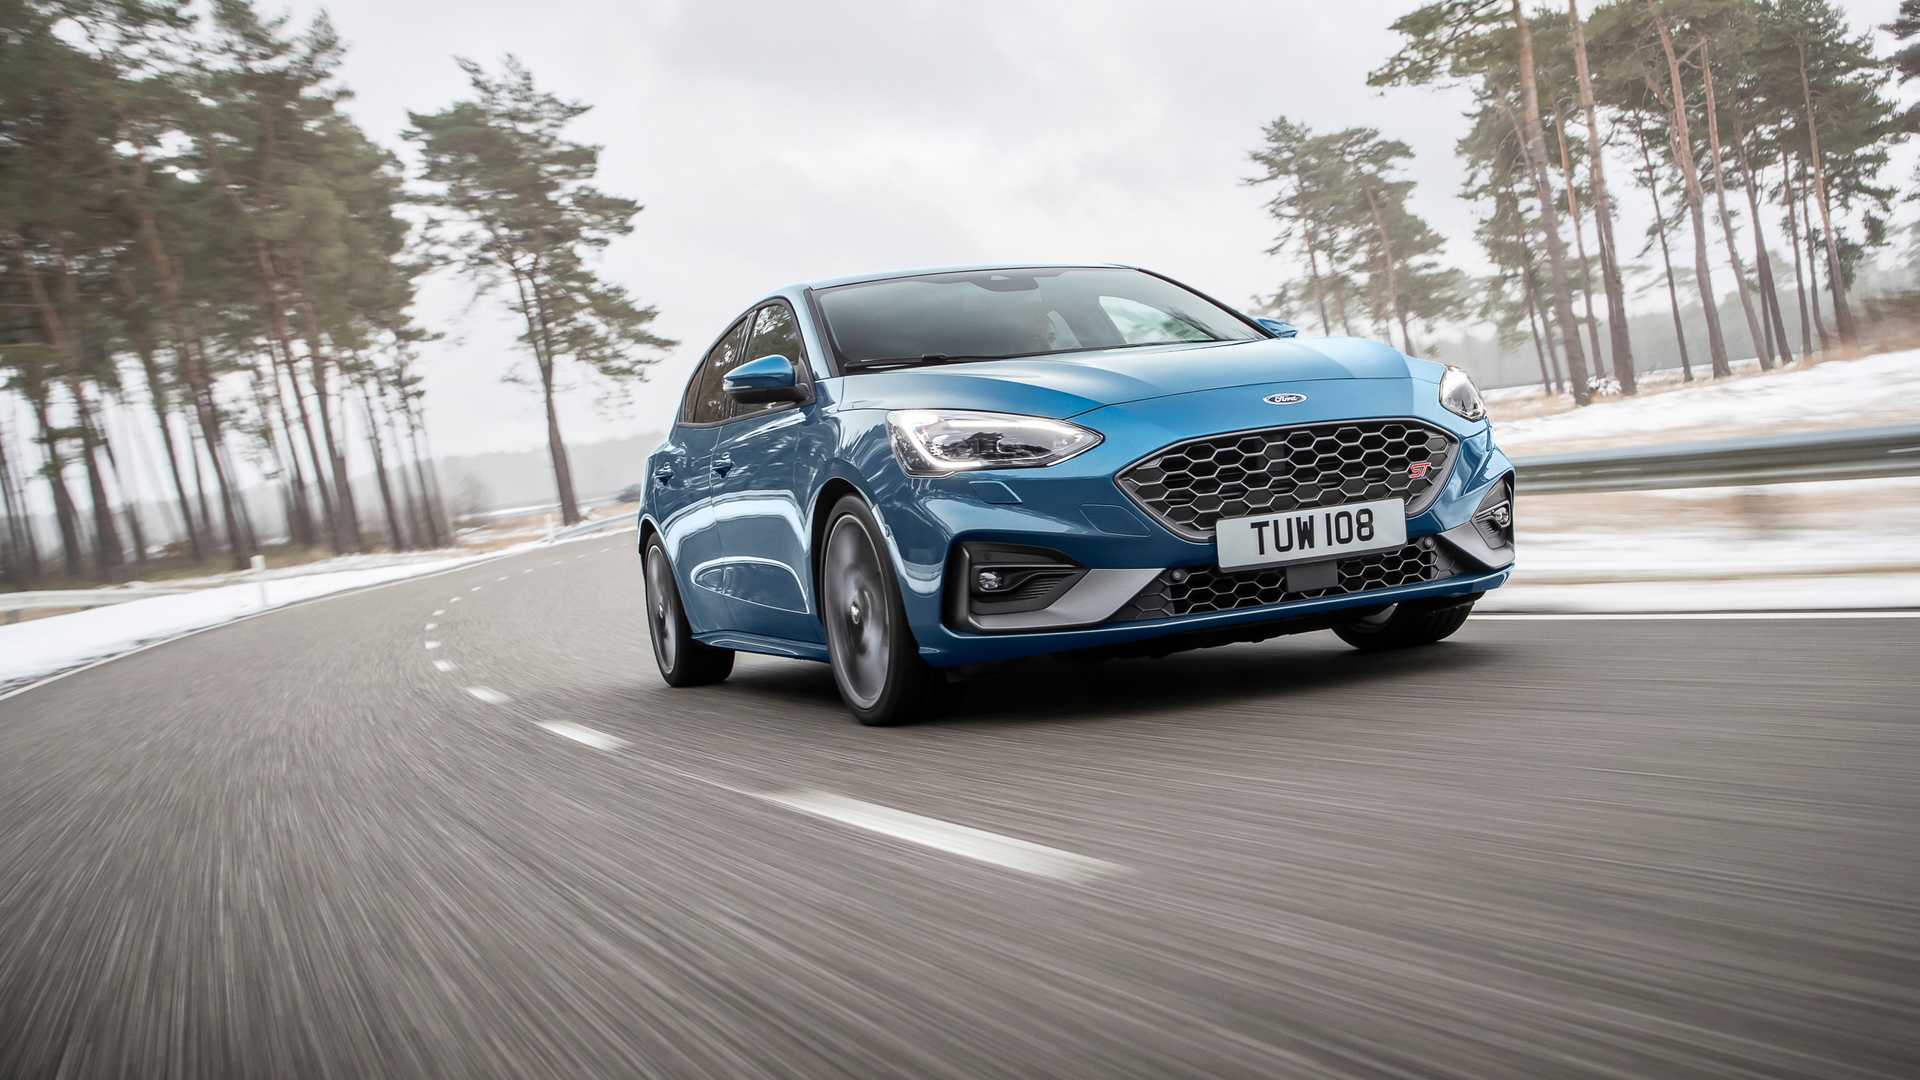 2019 Ford Focus ST Revealed - More Powerful Than Ever Before